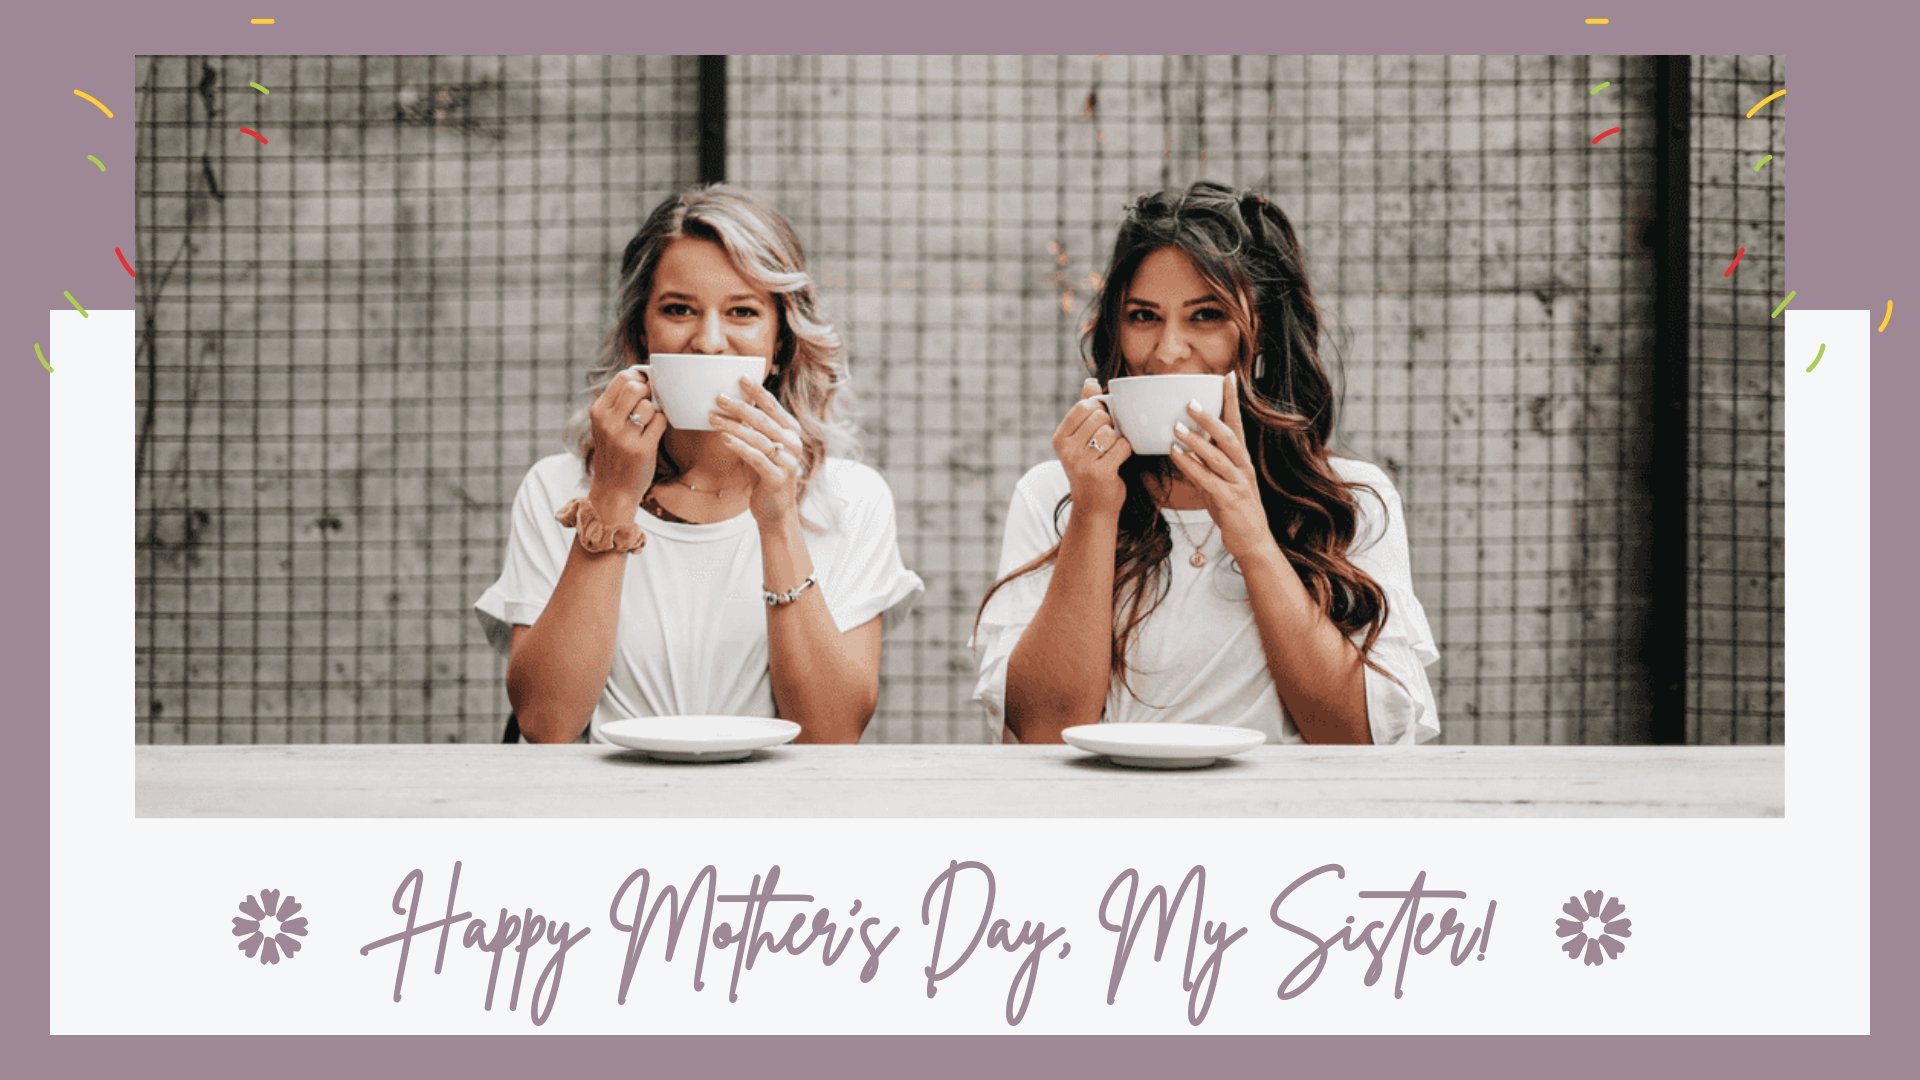 Happy Mother's Day Sister Image